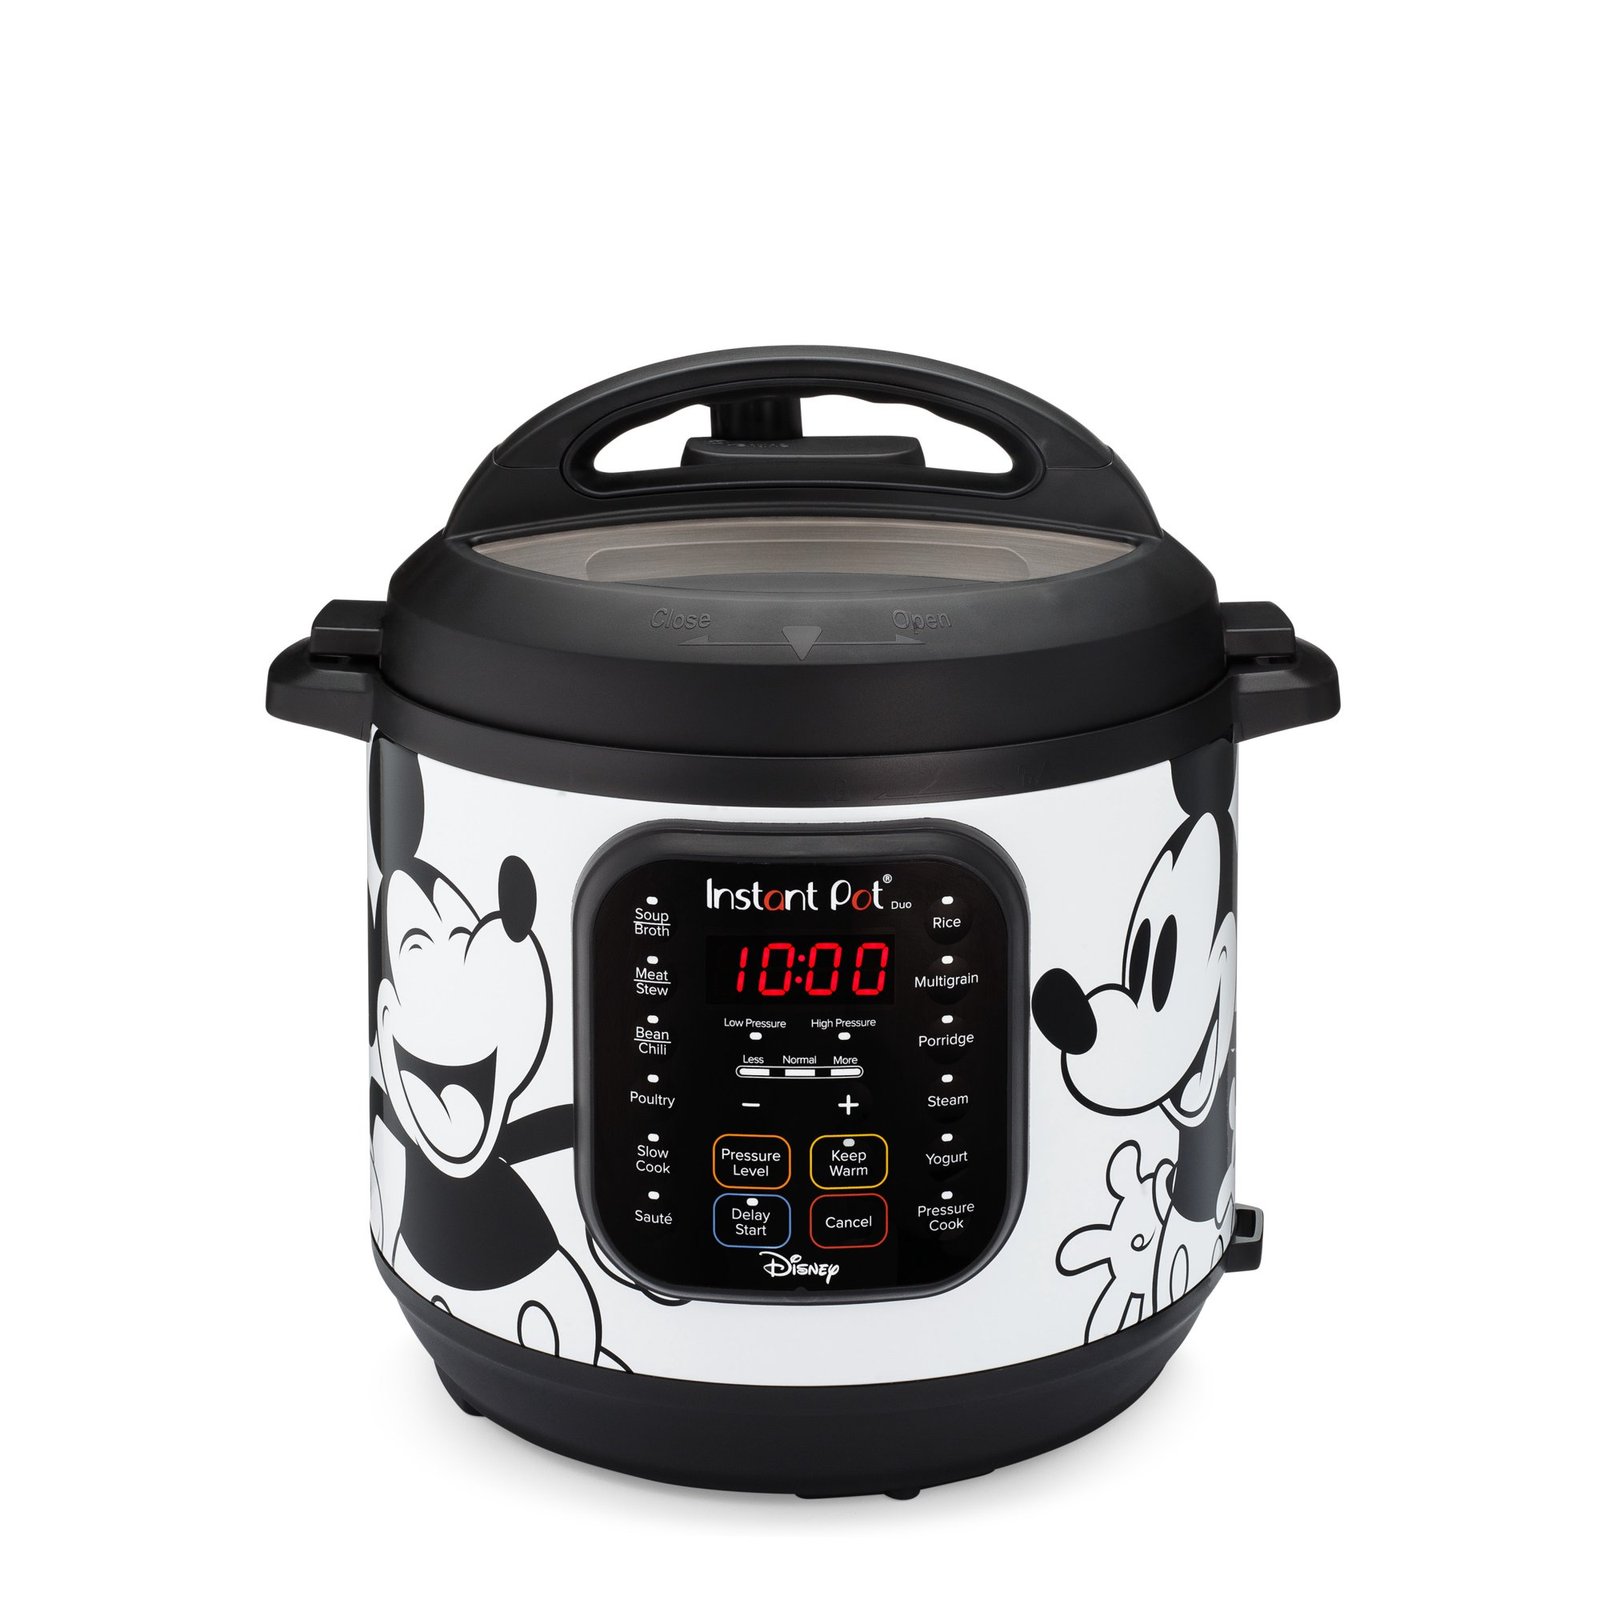 https://themarketdepot.com/wp-content/uploads/2023/01/Instant-Pot-6-Quart-Duo-Electric-Pressure-Cooker-7-in-1-Yogurt-Maker-Food-Steamer-Slow-Cooker-Rice-Cooker-More-Disney-Mickey-Mouse-White-3.jpeg